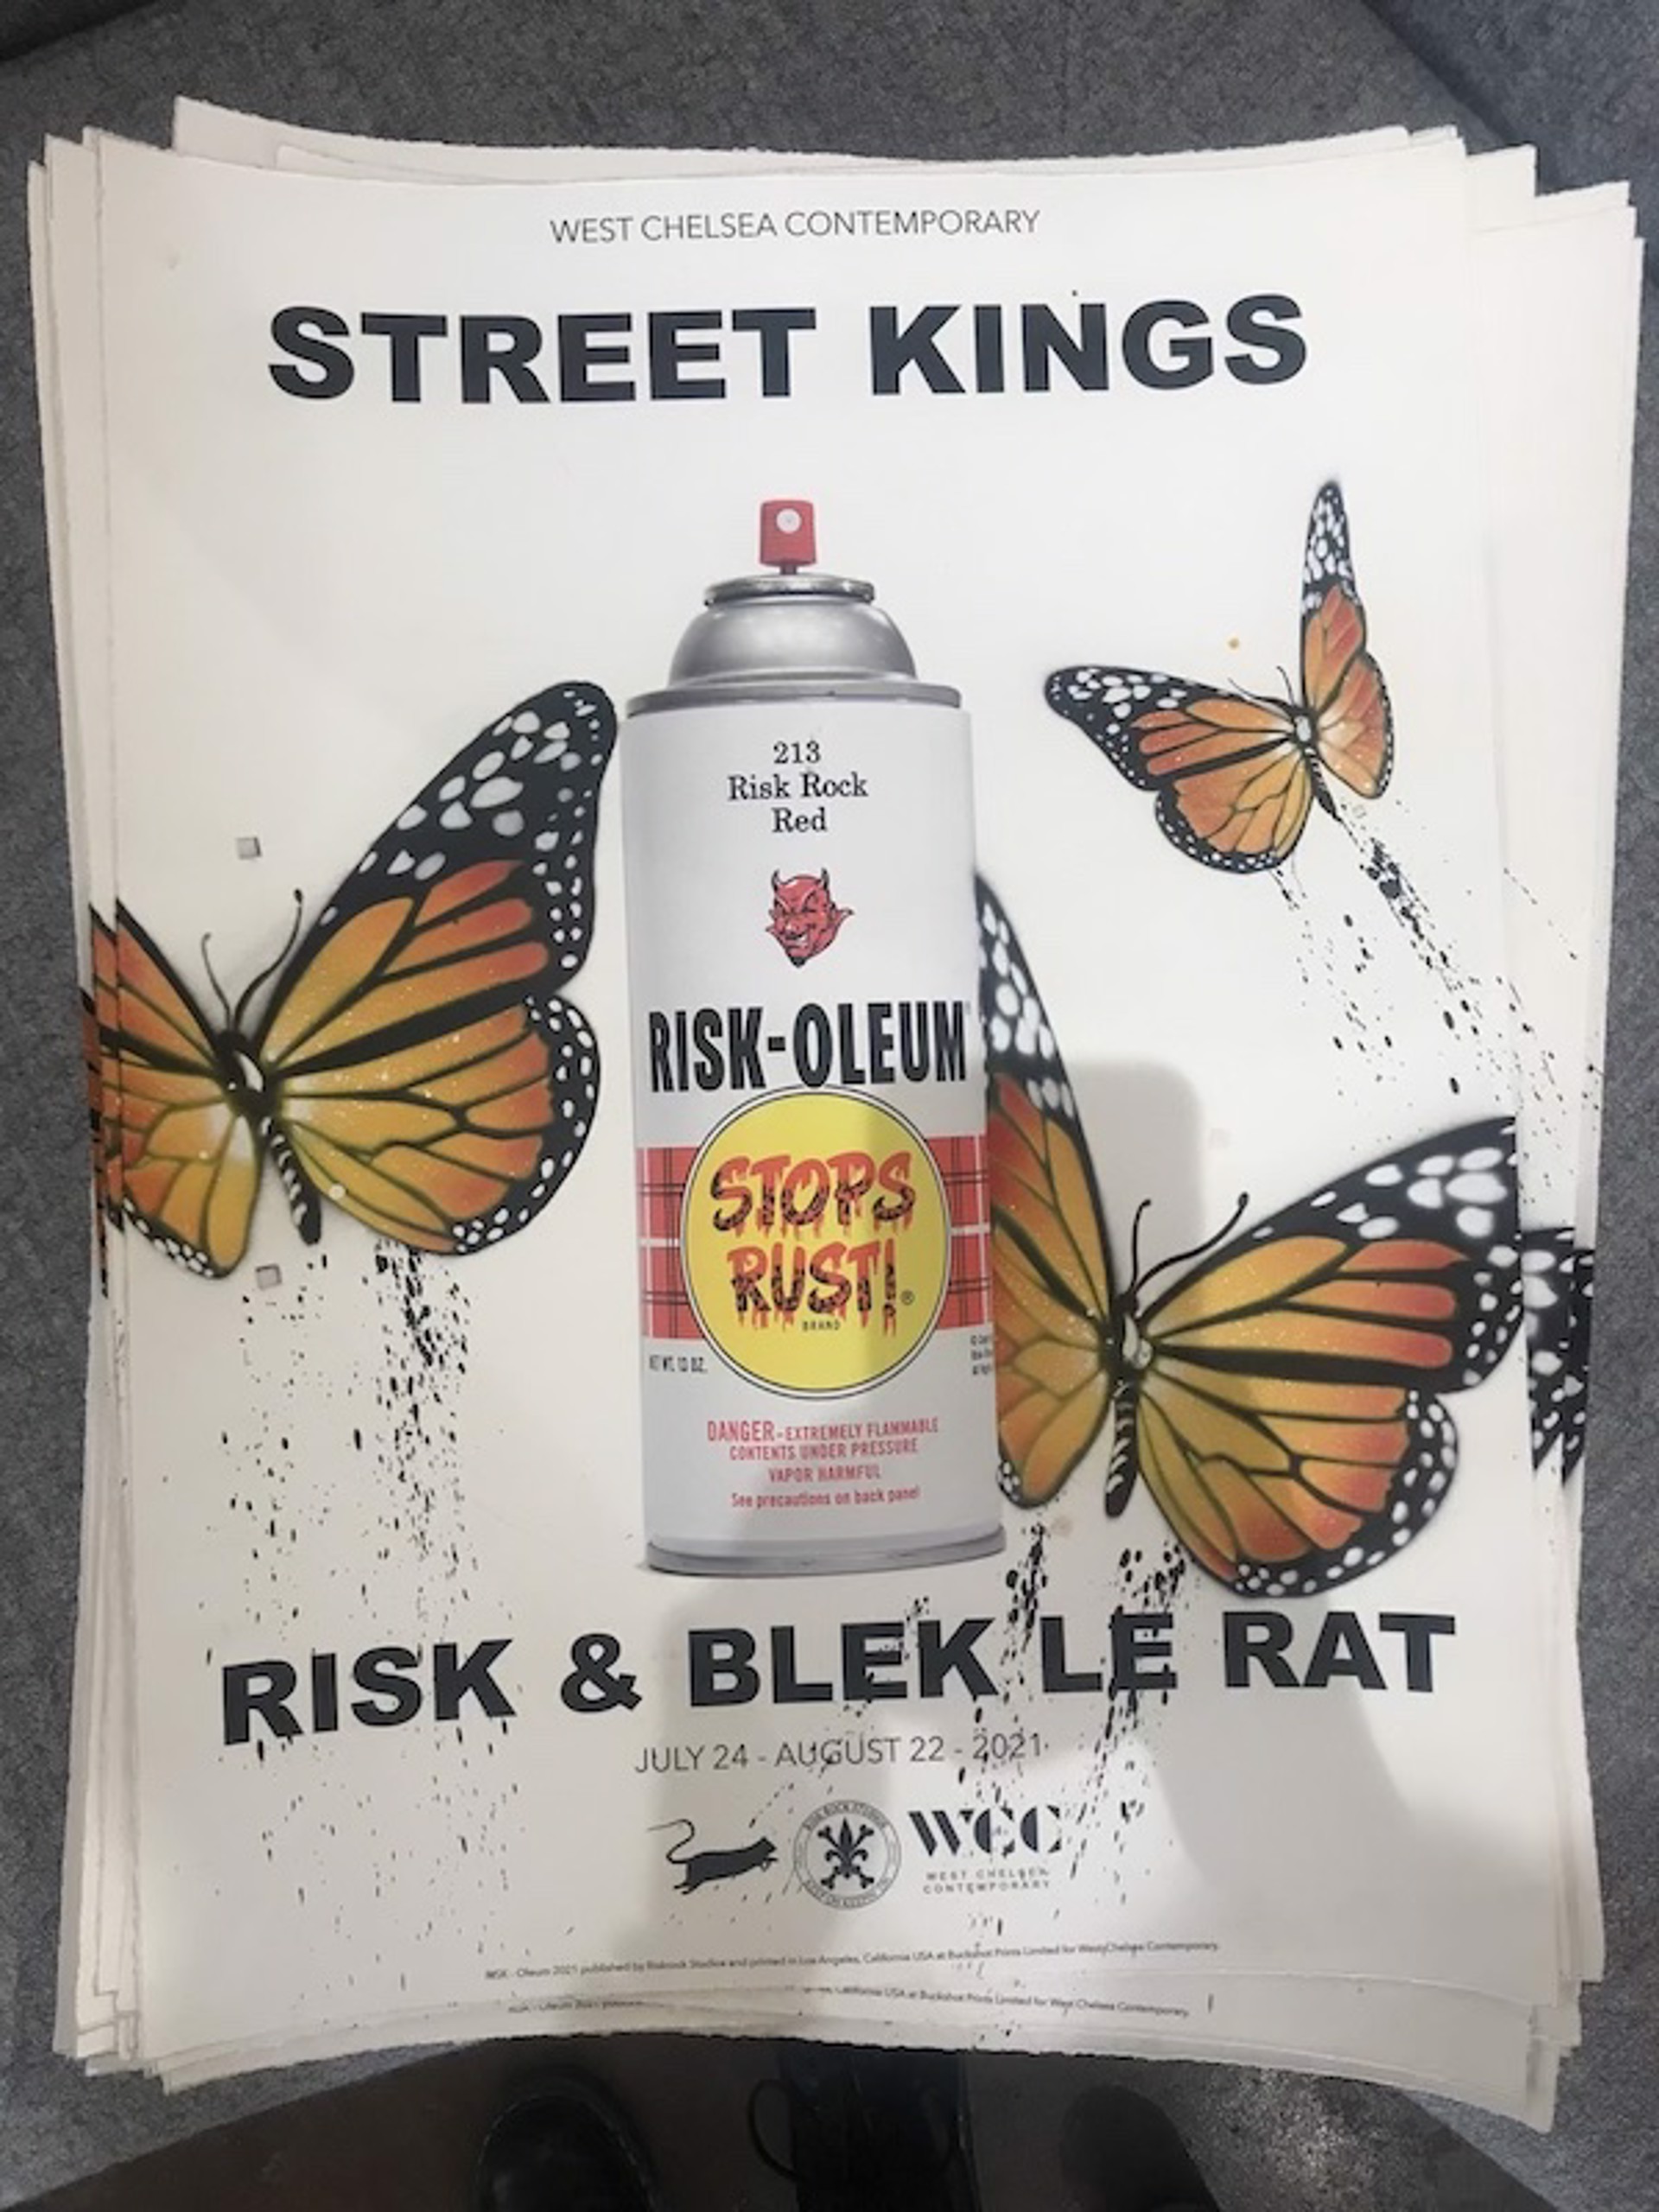 Street Kings Show Print (31/50) by Risk